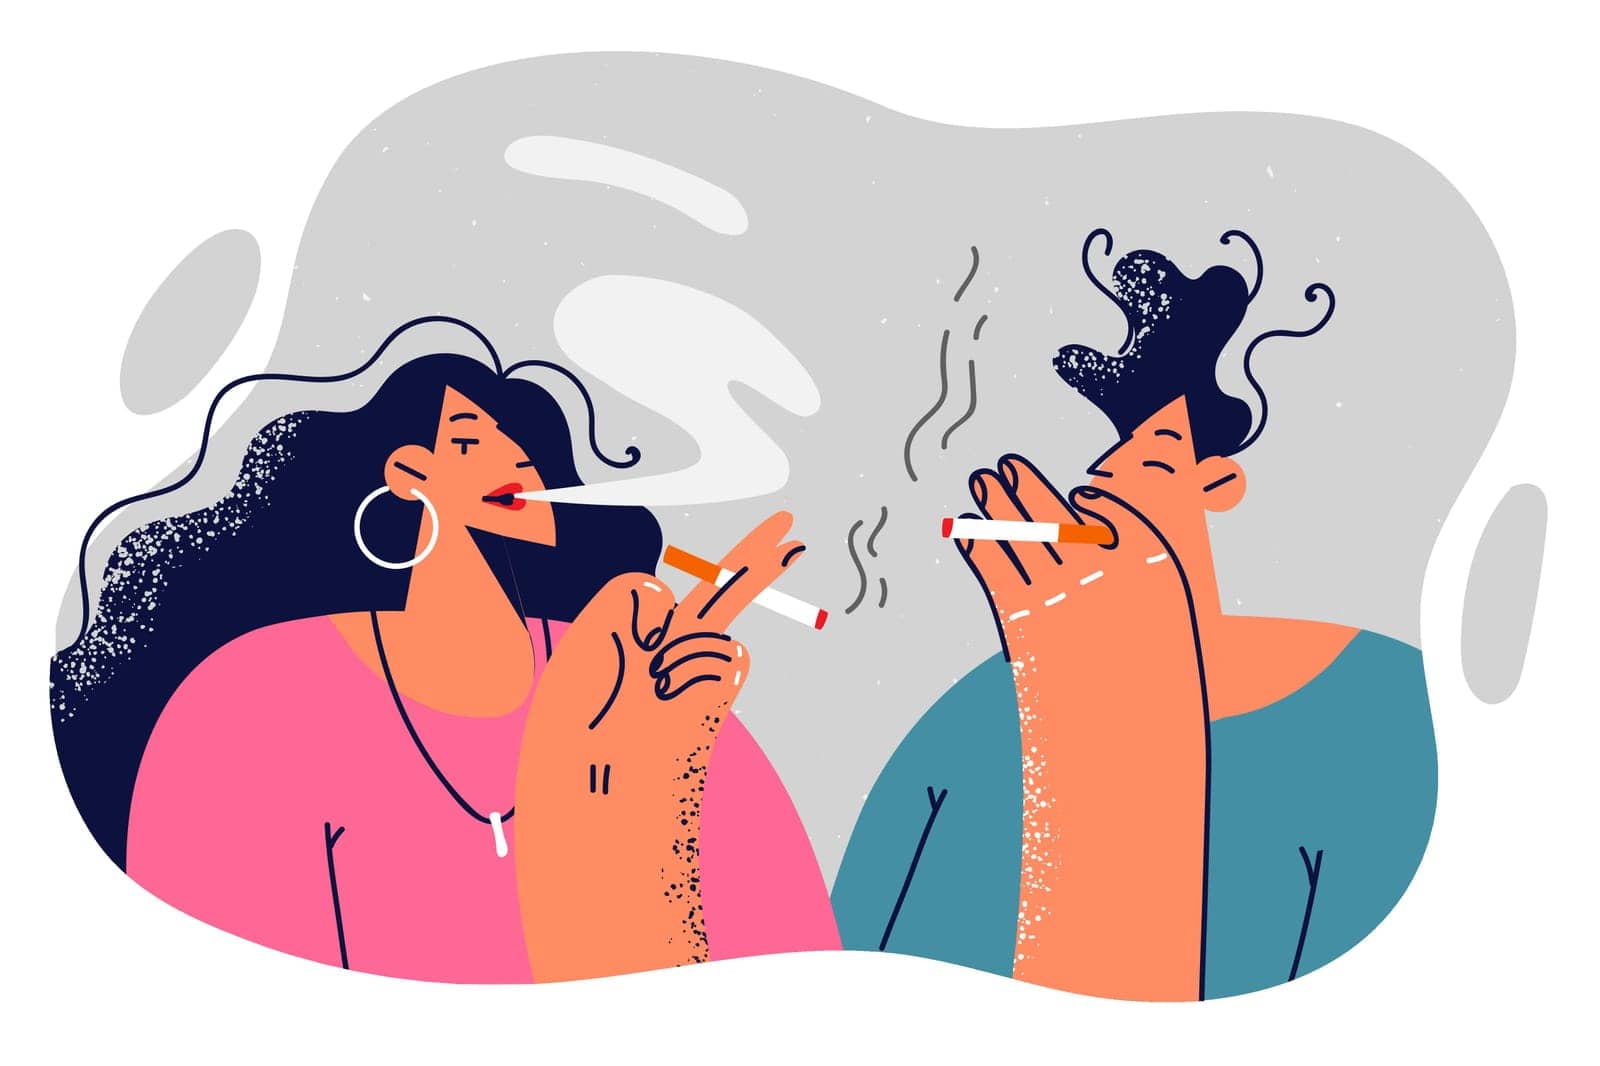 Man and woman smoking cigarettes enjoying tobacco smoke and gossiping during work break. Guy and girl who smoke cigarettes spoil their health due to addiction to bad habit that causes cancer